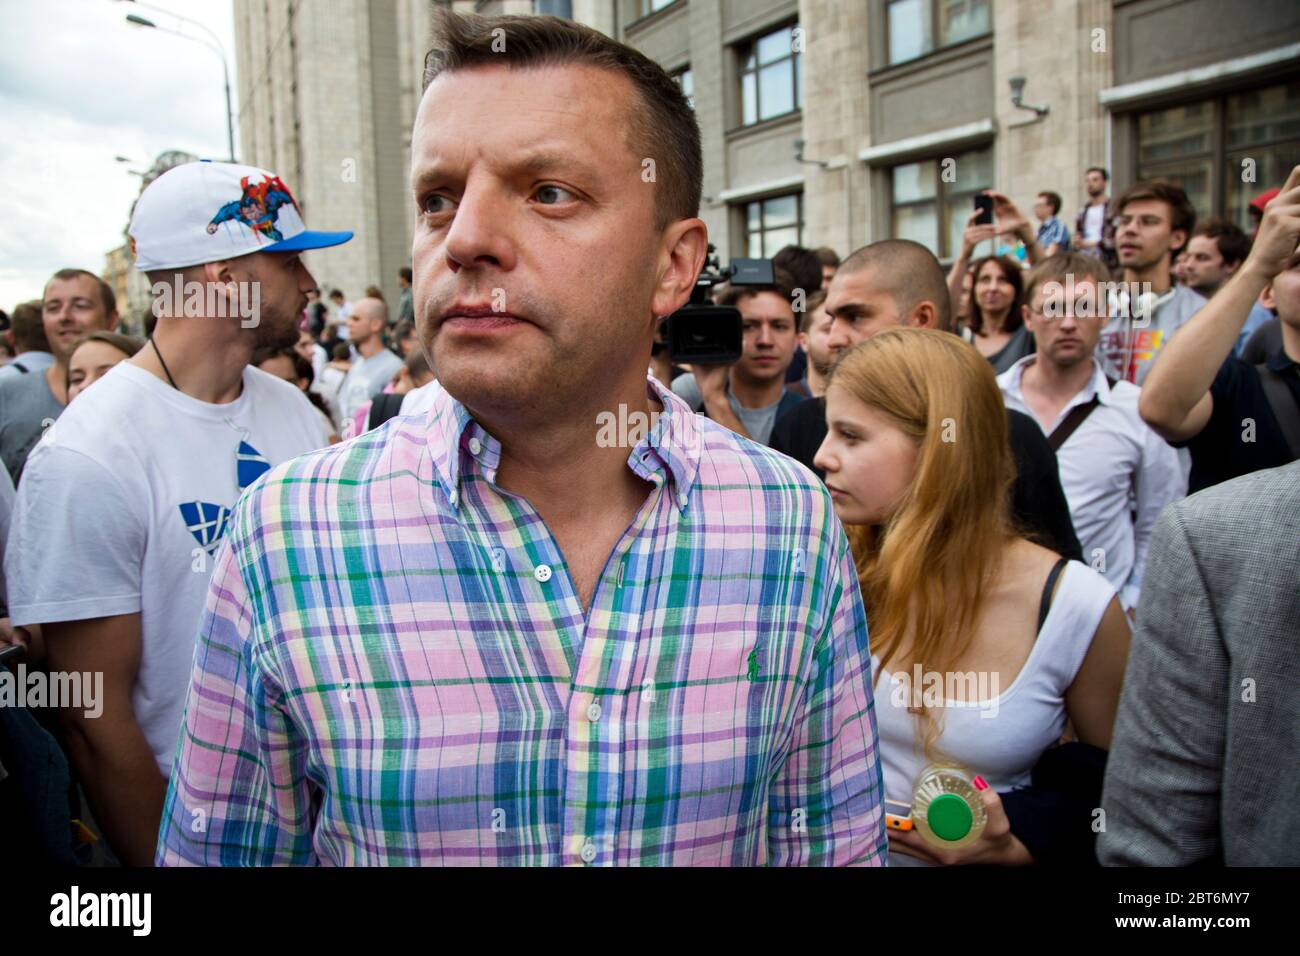 Moscow, Russia. 18th of July, 2013 Russian journalist Leonid Parfenov during an unauthorized opposition rally in defense of Alexey Navalny on Okhotny Ryad street in the center of Moscow, Russia Stock Photo